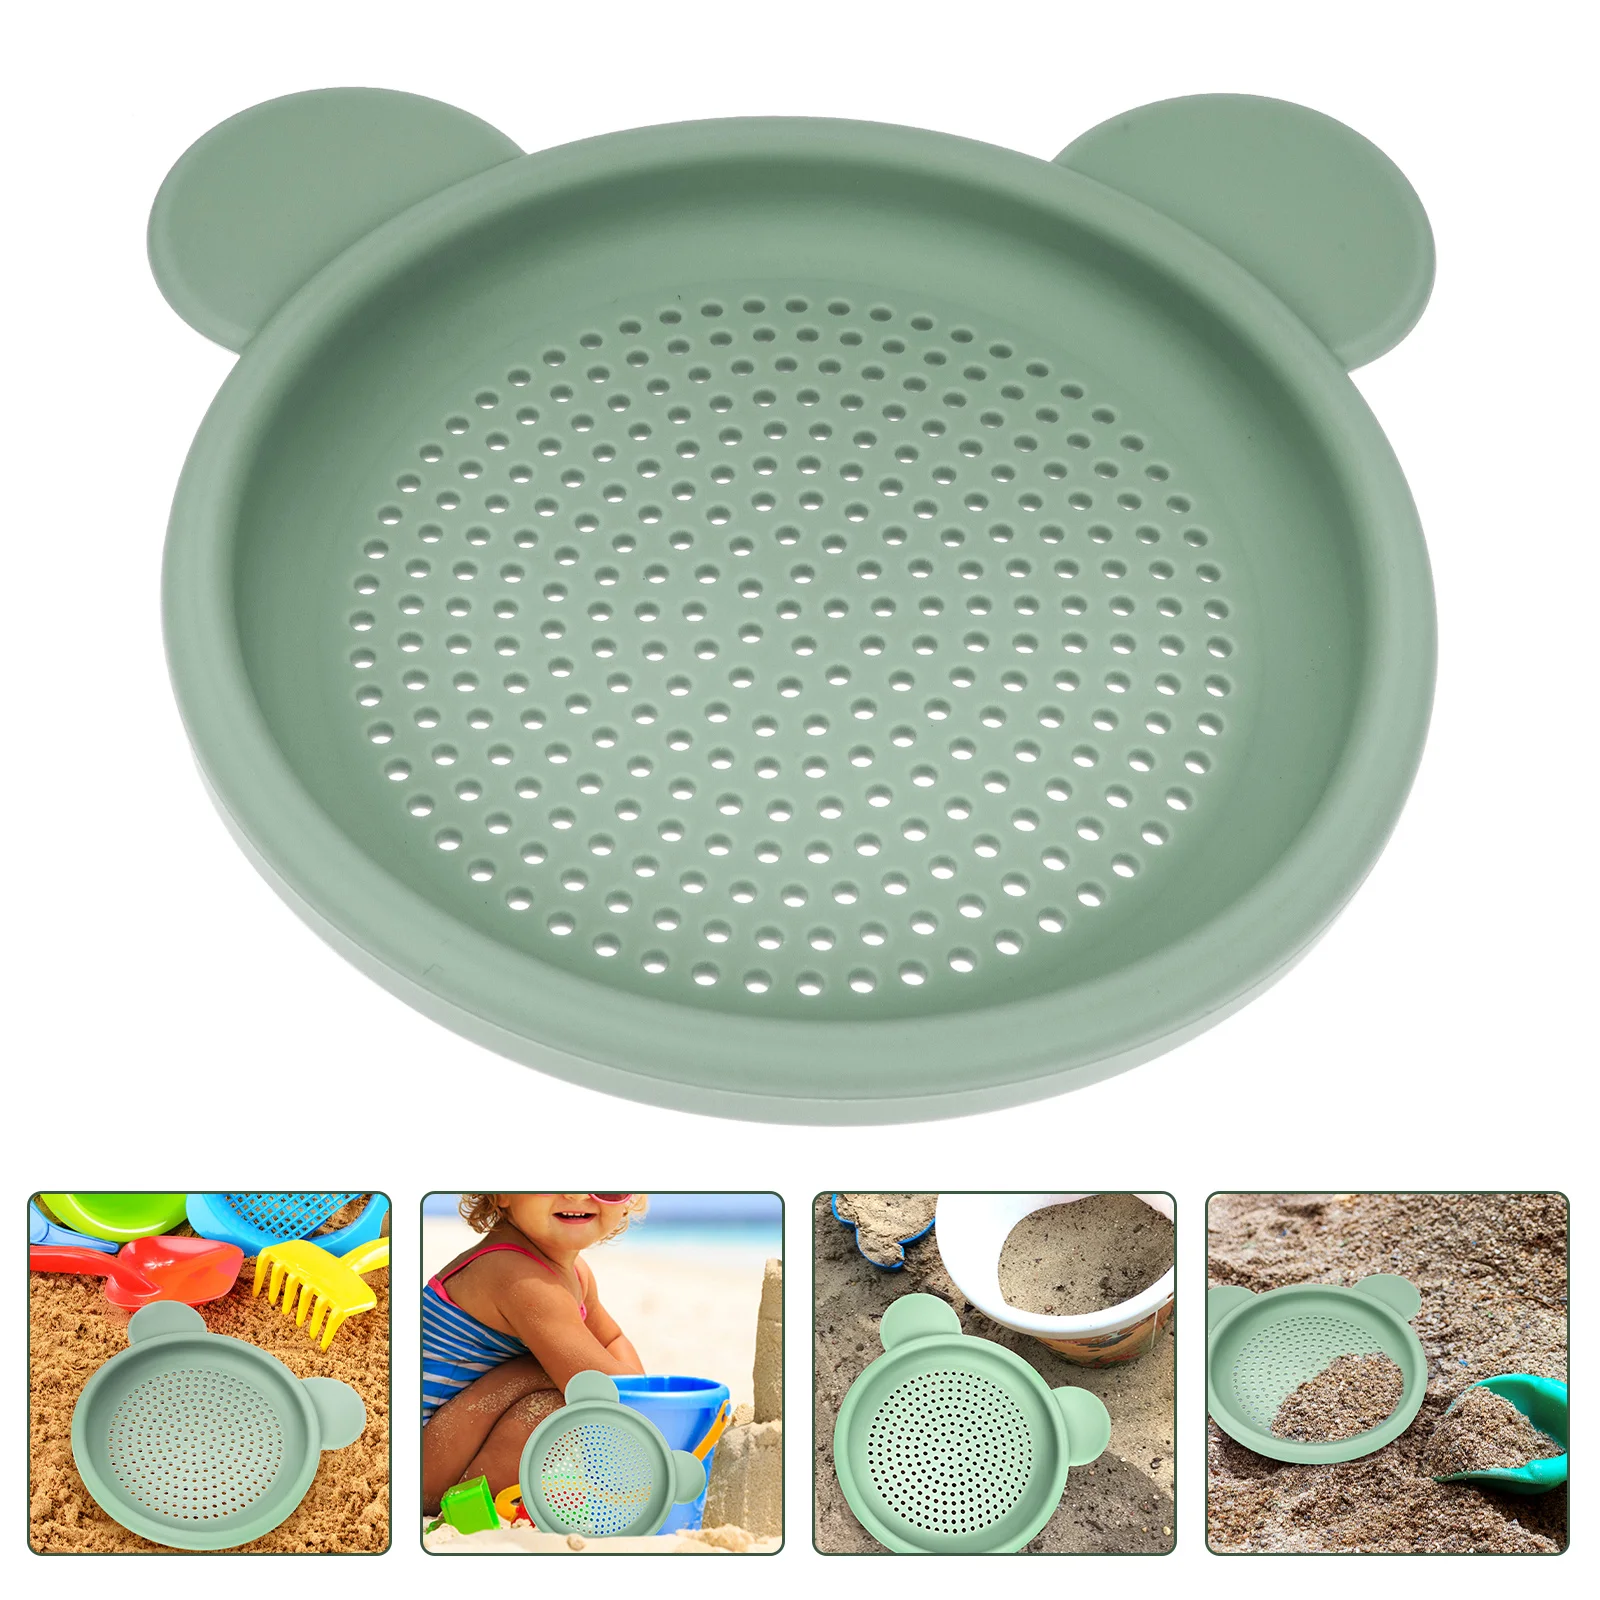 

Hourglass Toy Sieves Toys for Beach Sand Sifter Kids Plaything Beaches Strainer